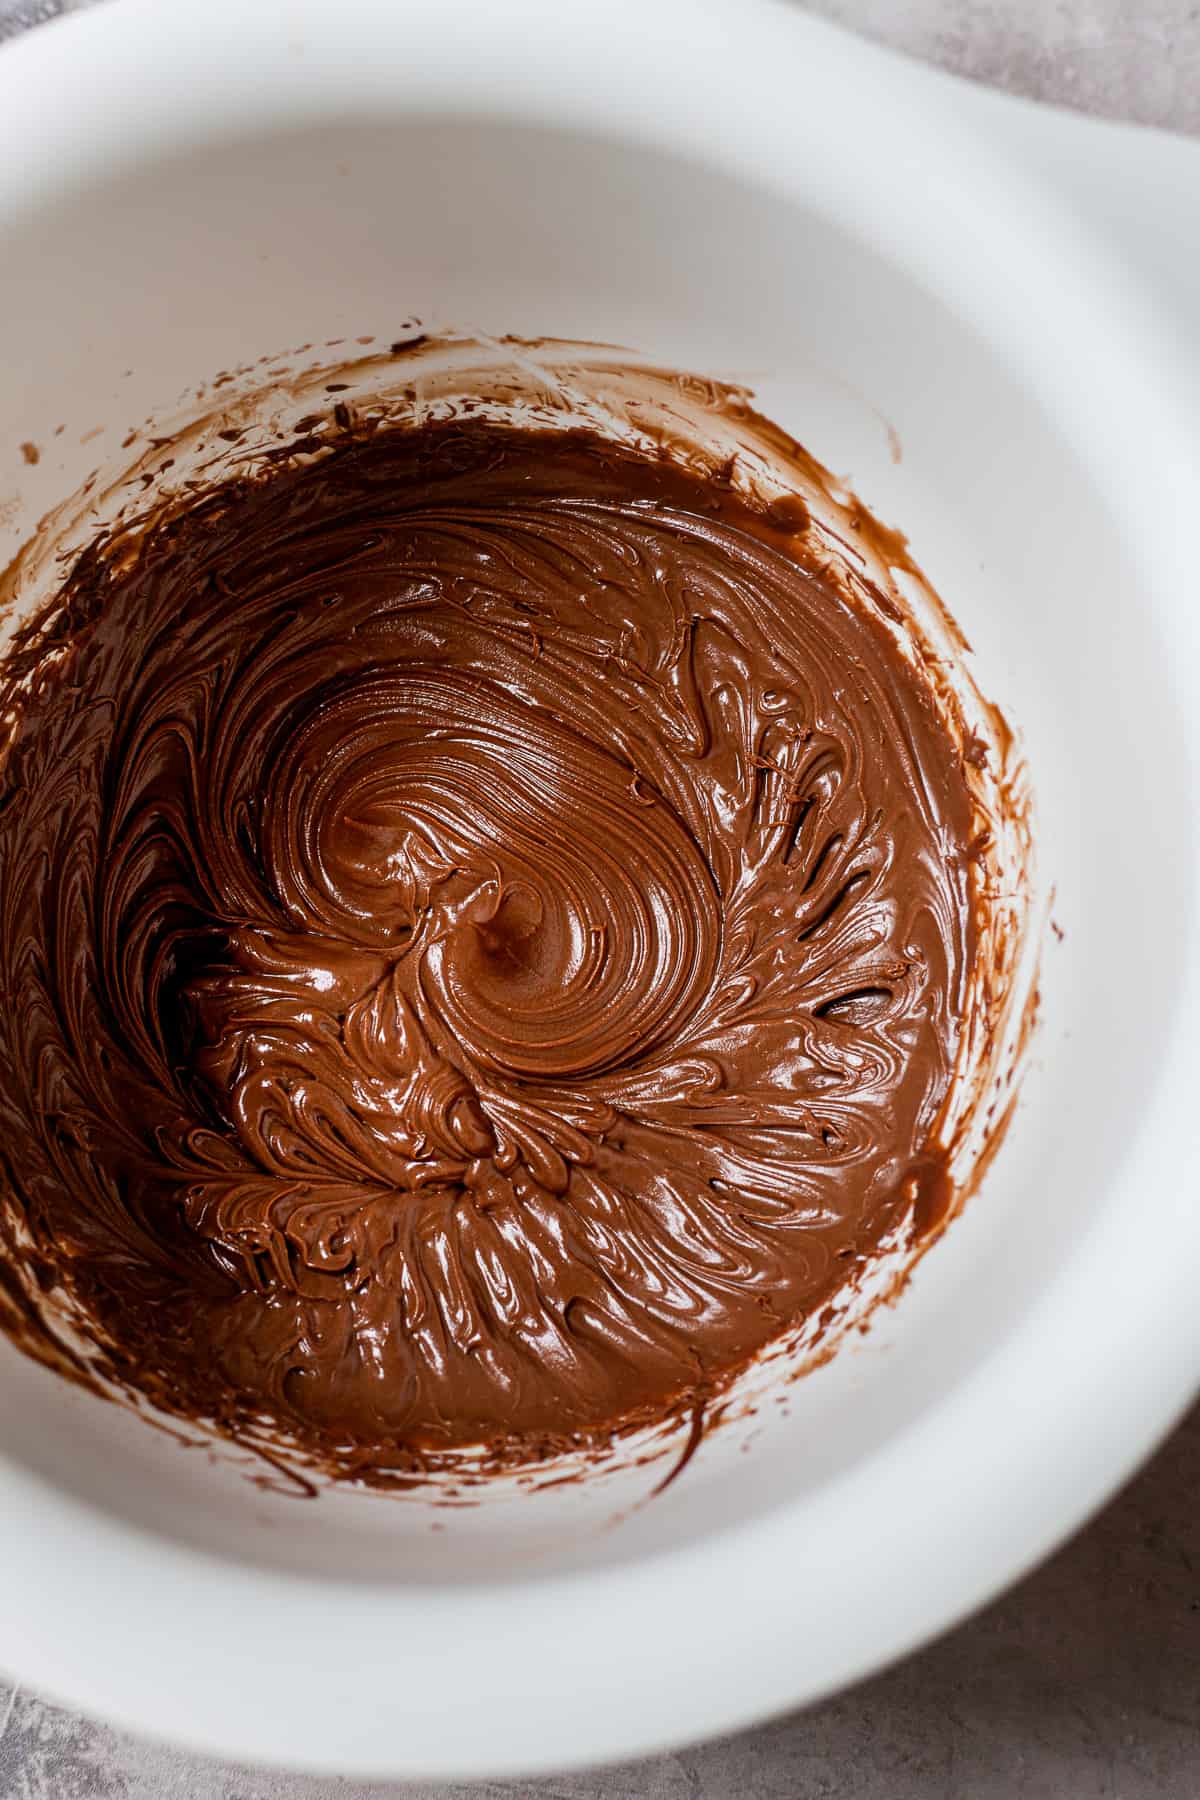 Easy Chocolate Mousse (3 Ingredients) Aldi Ingredients Only - Bites